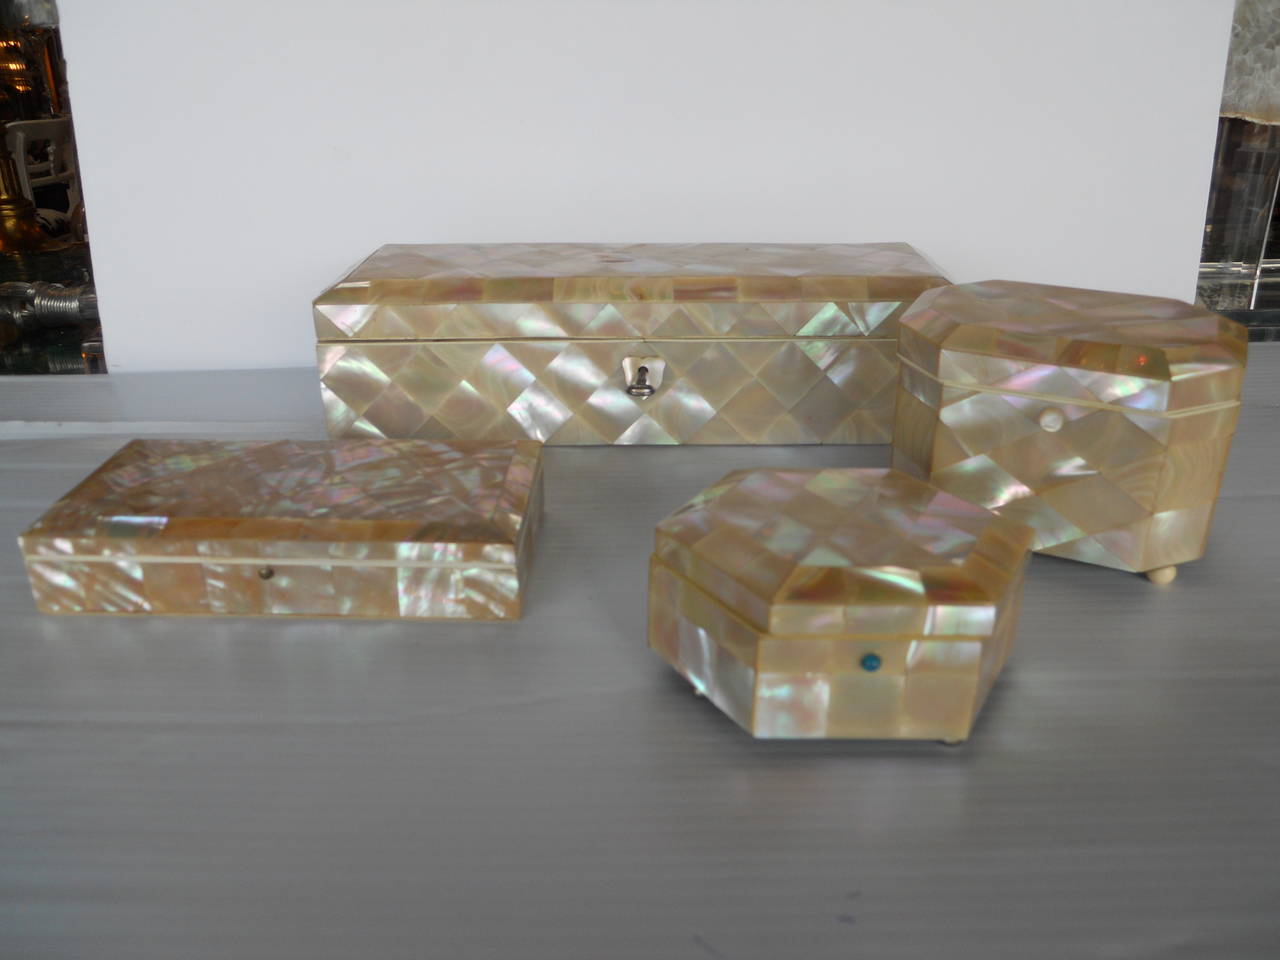 Beautiful set of four mother-of-pearl boxes.
Dimensions: 1. 6